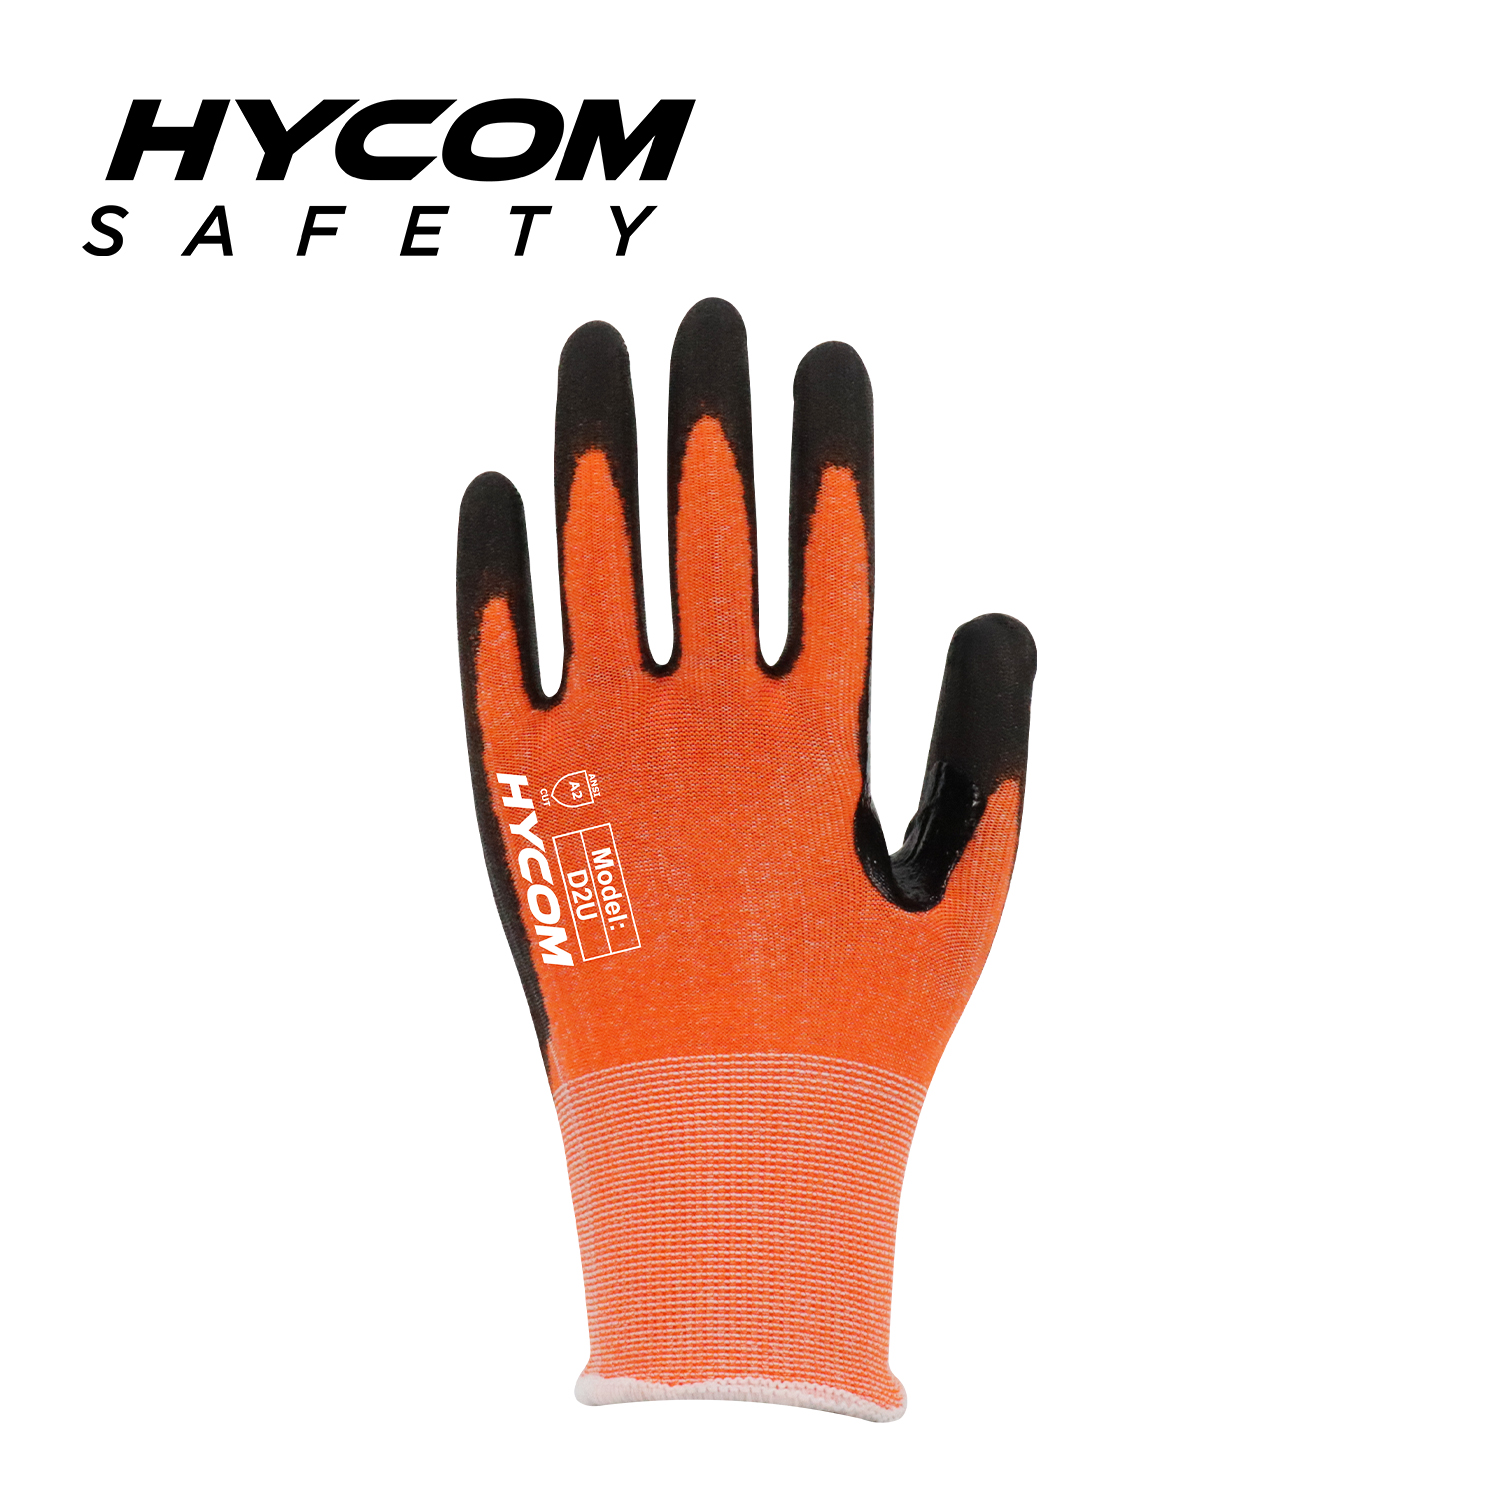 HYCOM 18G ANSI 2 PPE Glove No Steel No Glass Cut Resistant Glove with Palm Polyurethane Coating Reinceforcement at Thumb Crotch